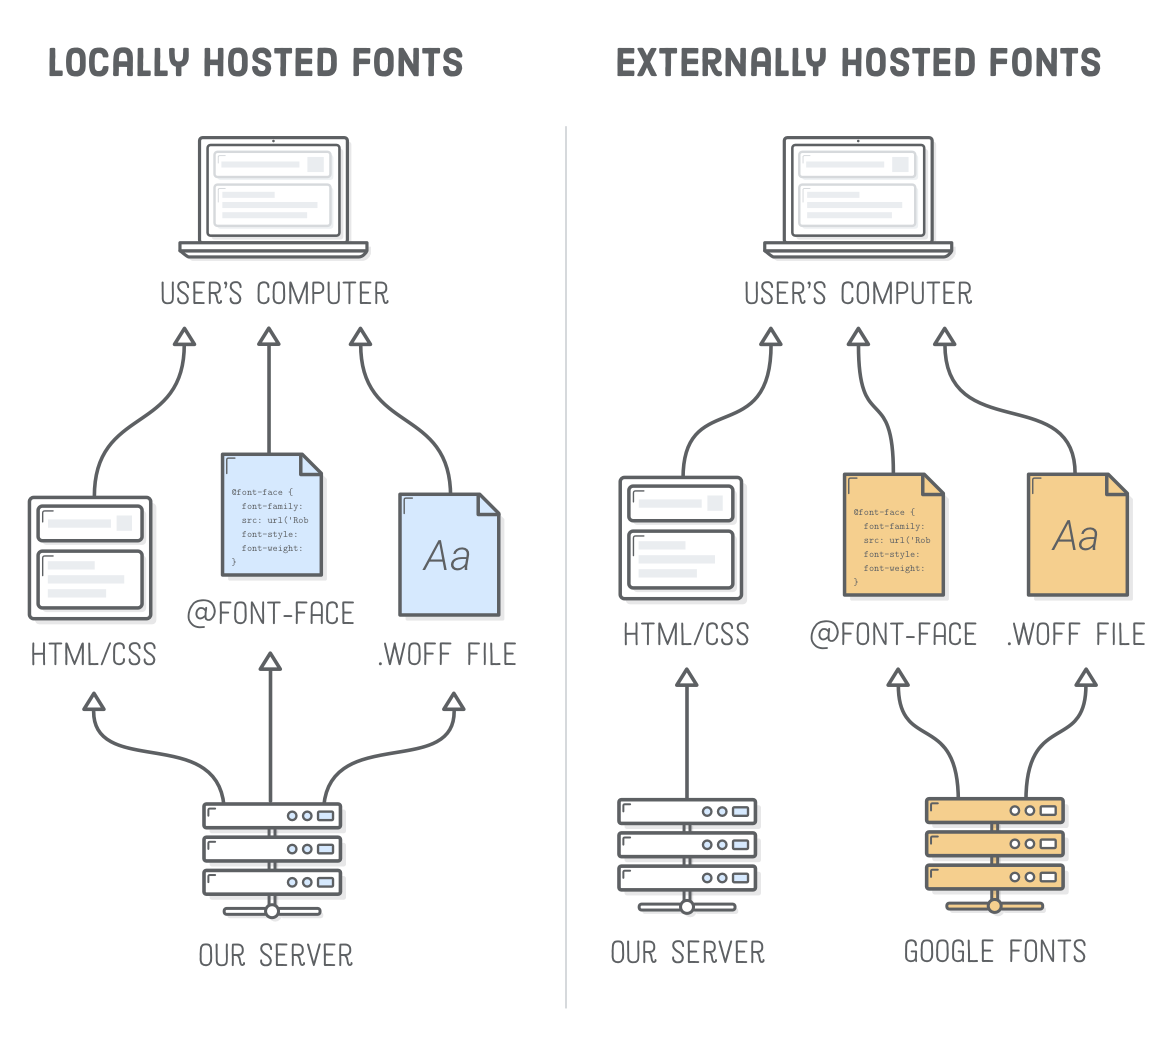 Diagram: serving web fonts from our own web server versus serving them from Google Fonts’ servers